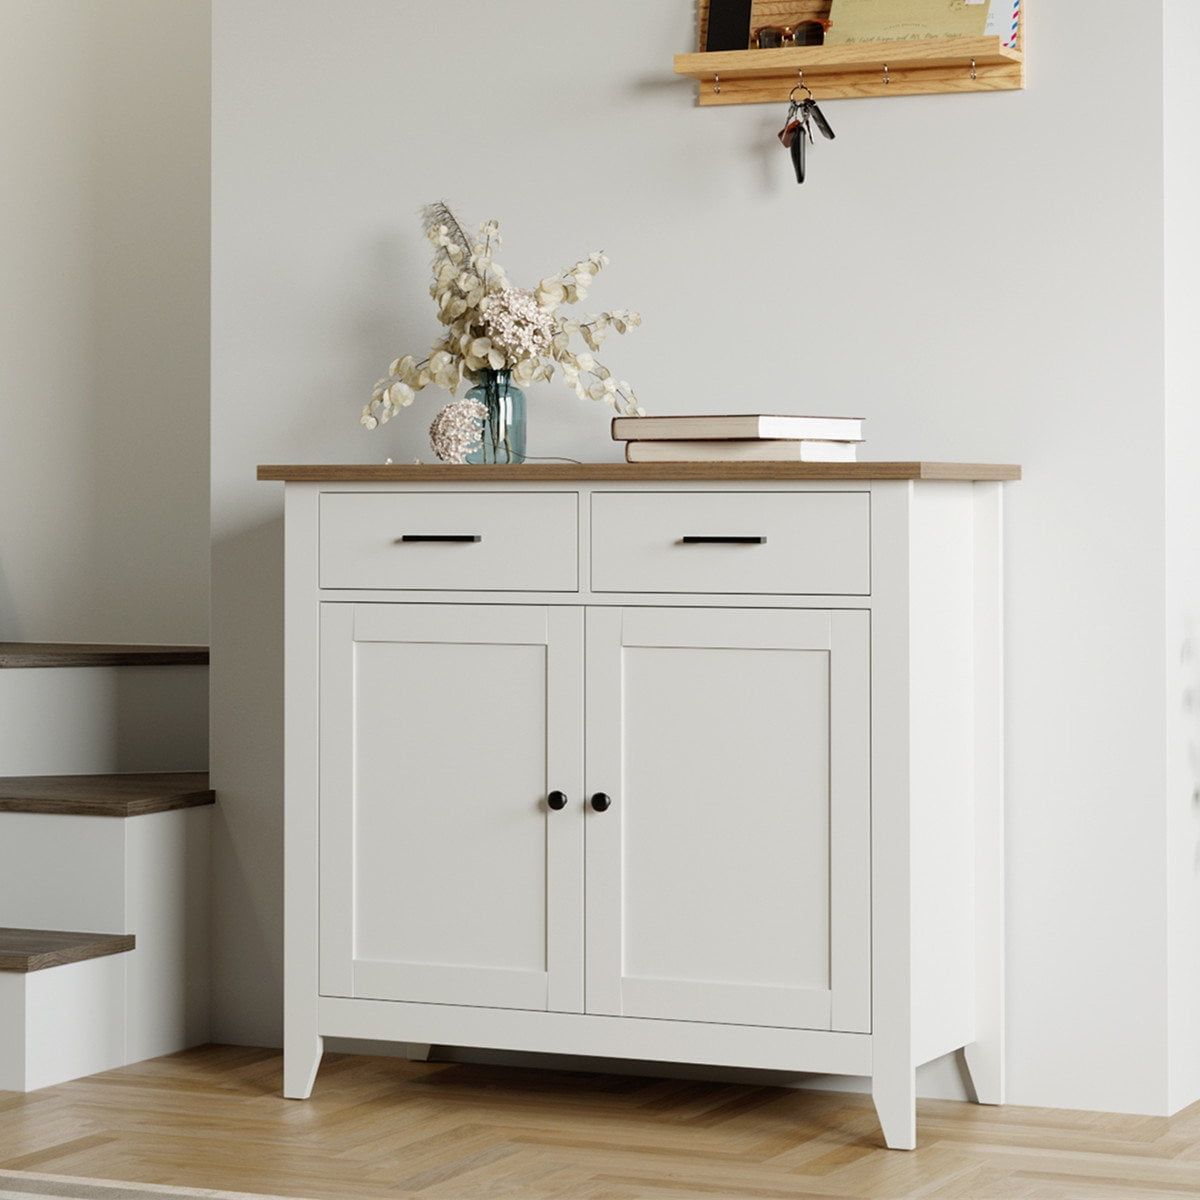 Homfa Entryway Storage Cabinet, Sideboard With 2 Drawers For Kitchen Living  Room, White – Walmart Pertaining To Sideboards For Entryway (View 6 of 15)